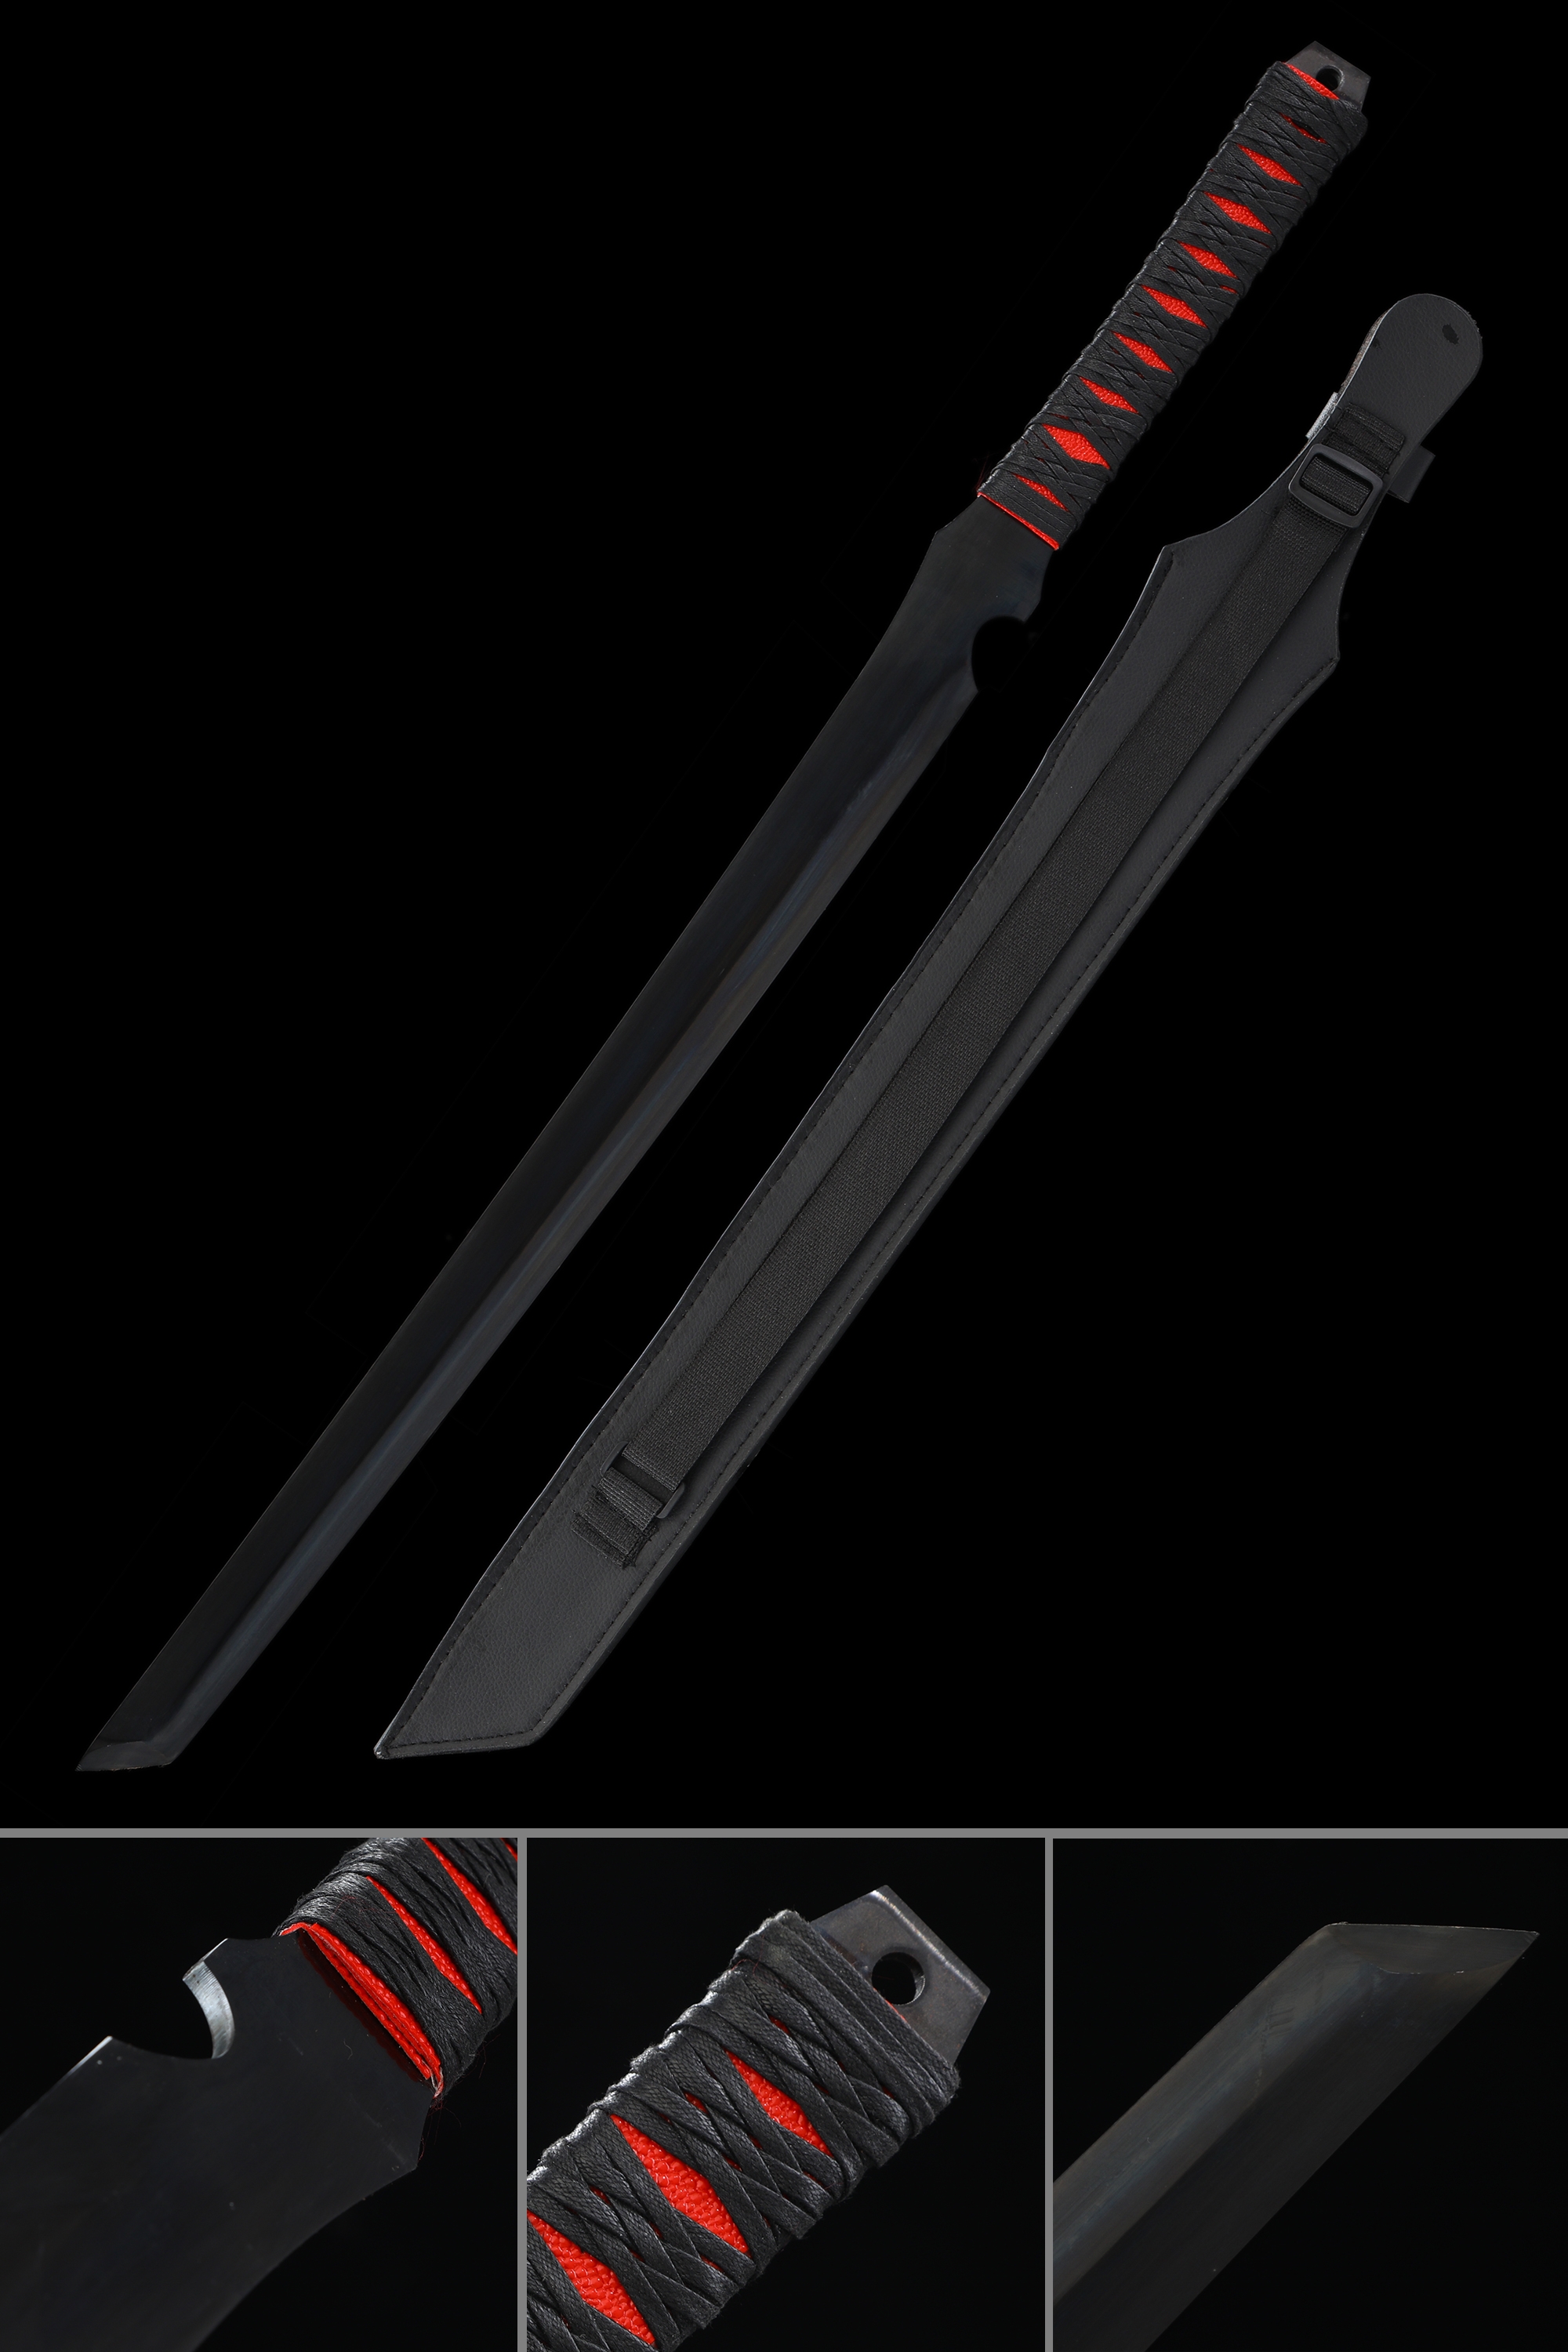 Handmade Fantasy Sword With Black Blade And Leather Scabbard